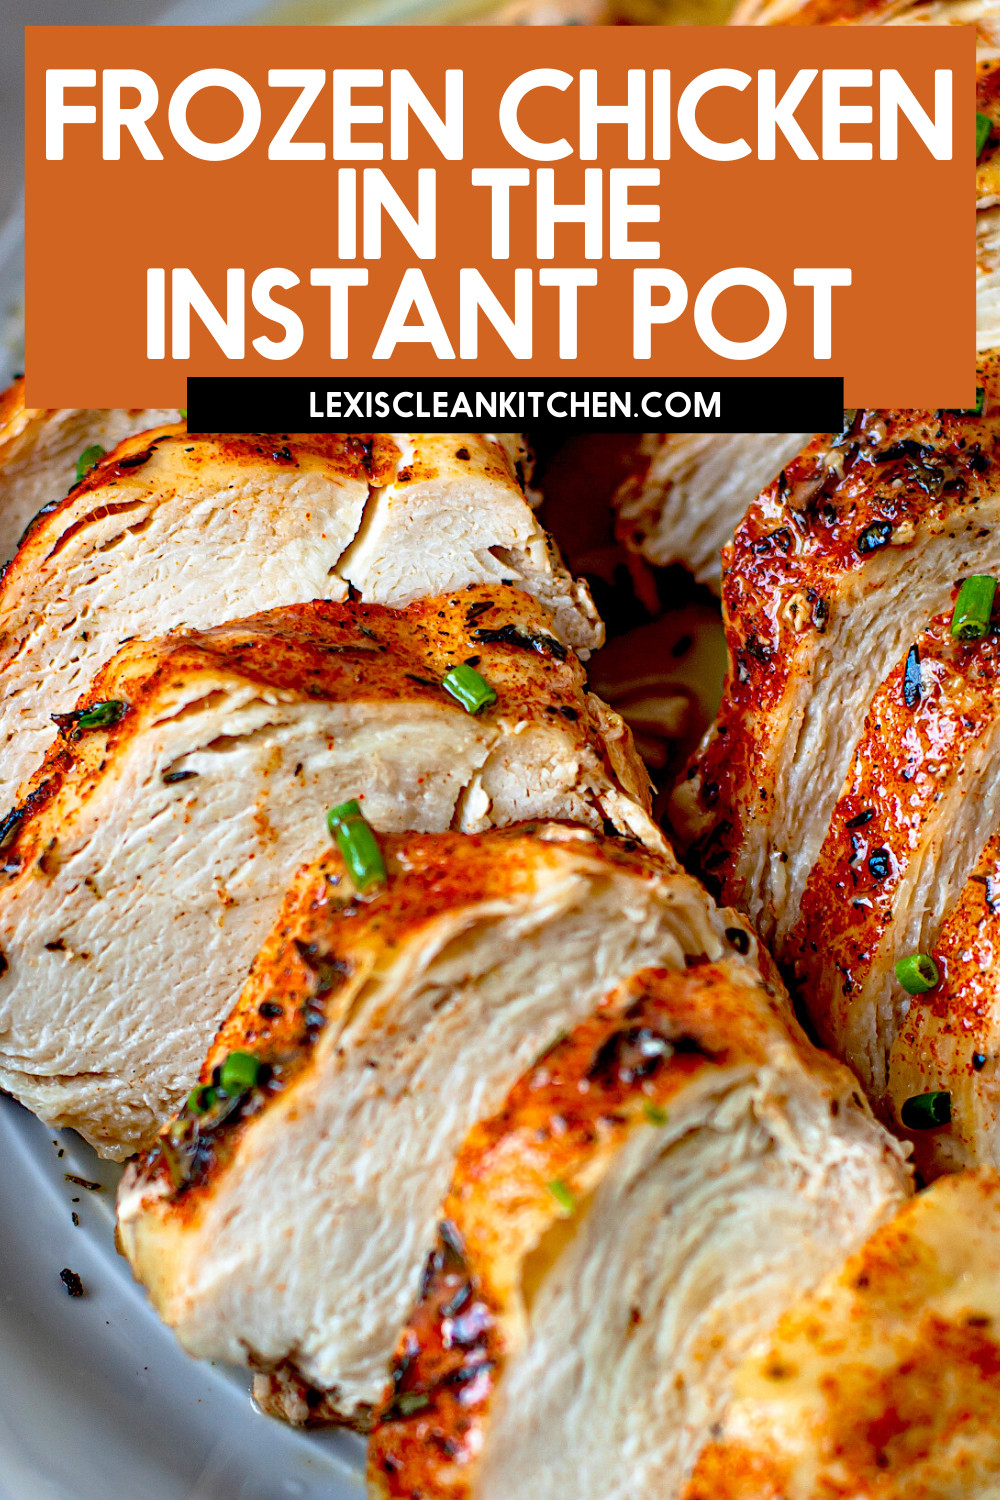 Frozen Chicken Recipes For Dinner
 How to Cook Frozen Chicken Breasts in the Instant Pot